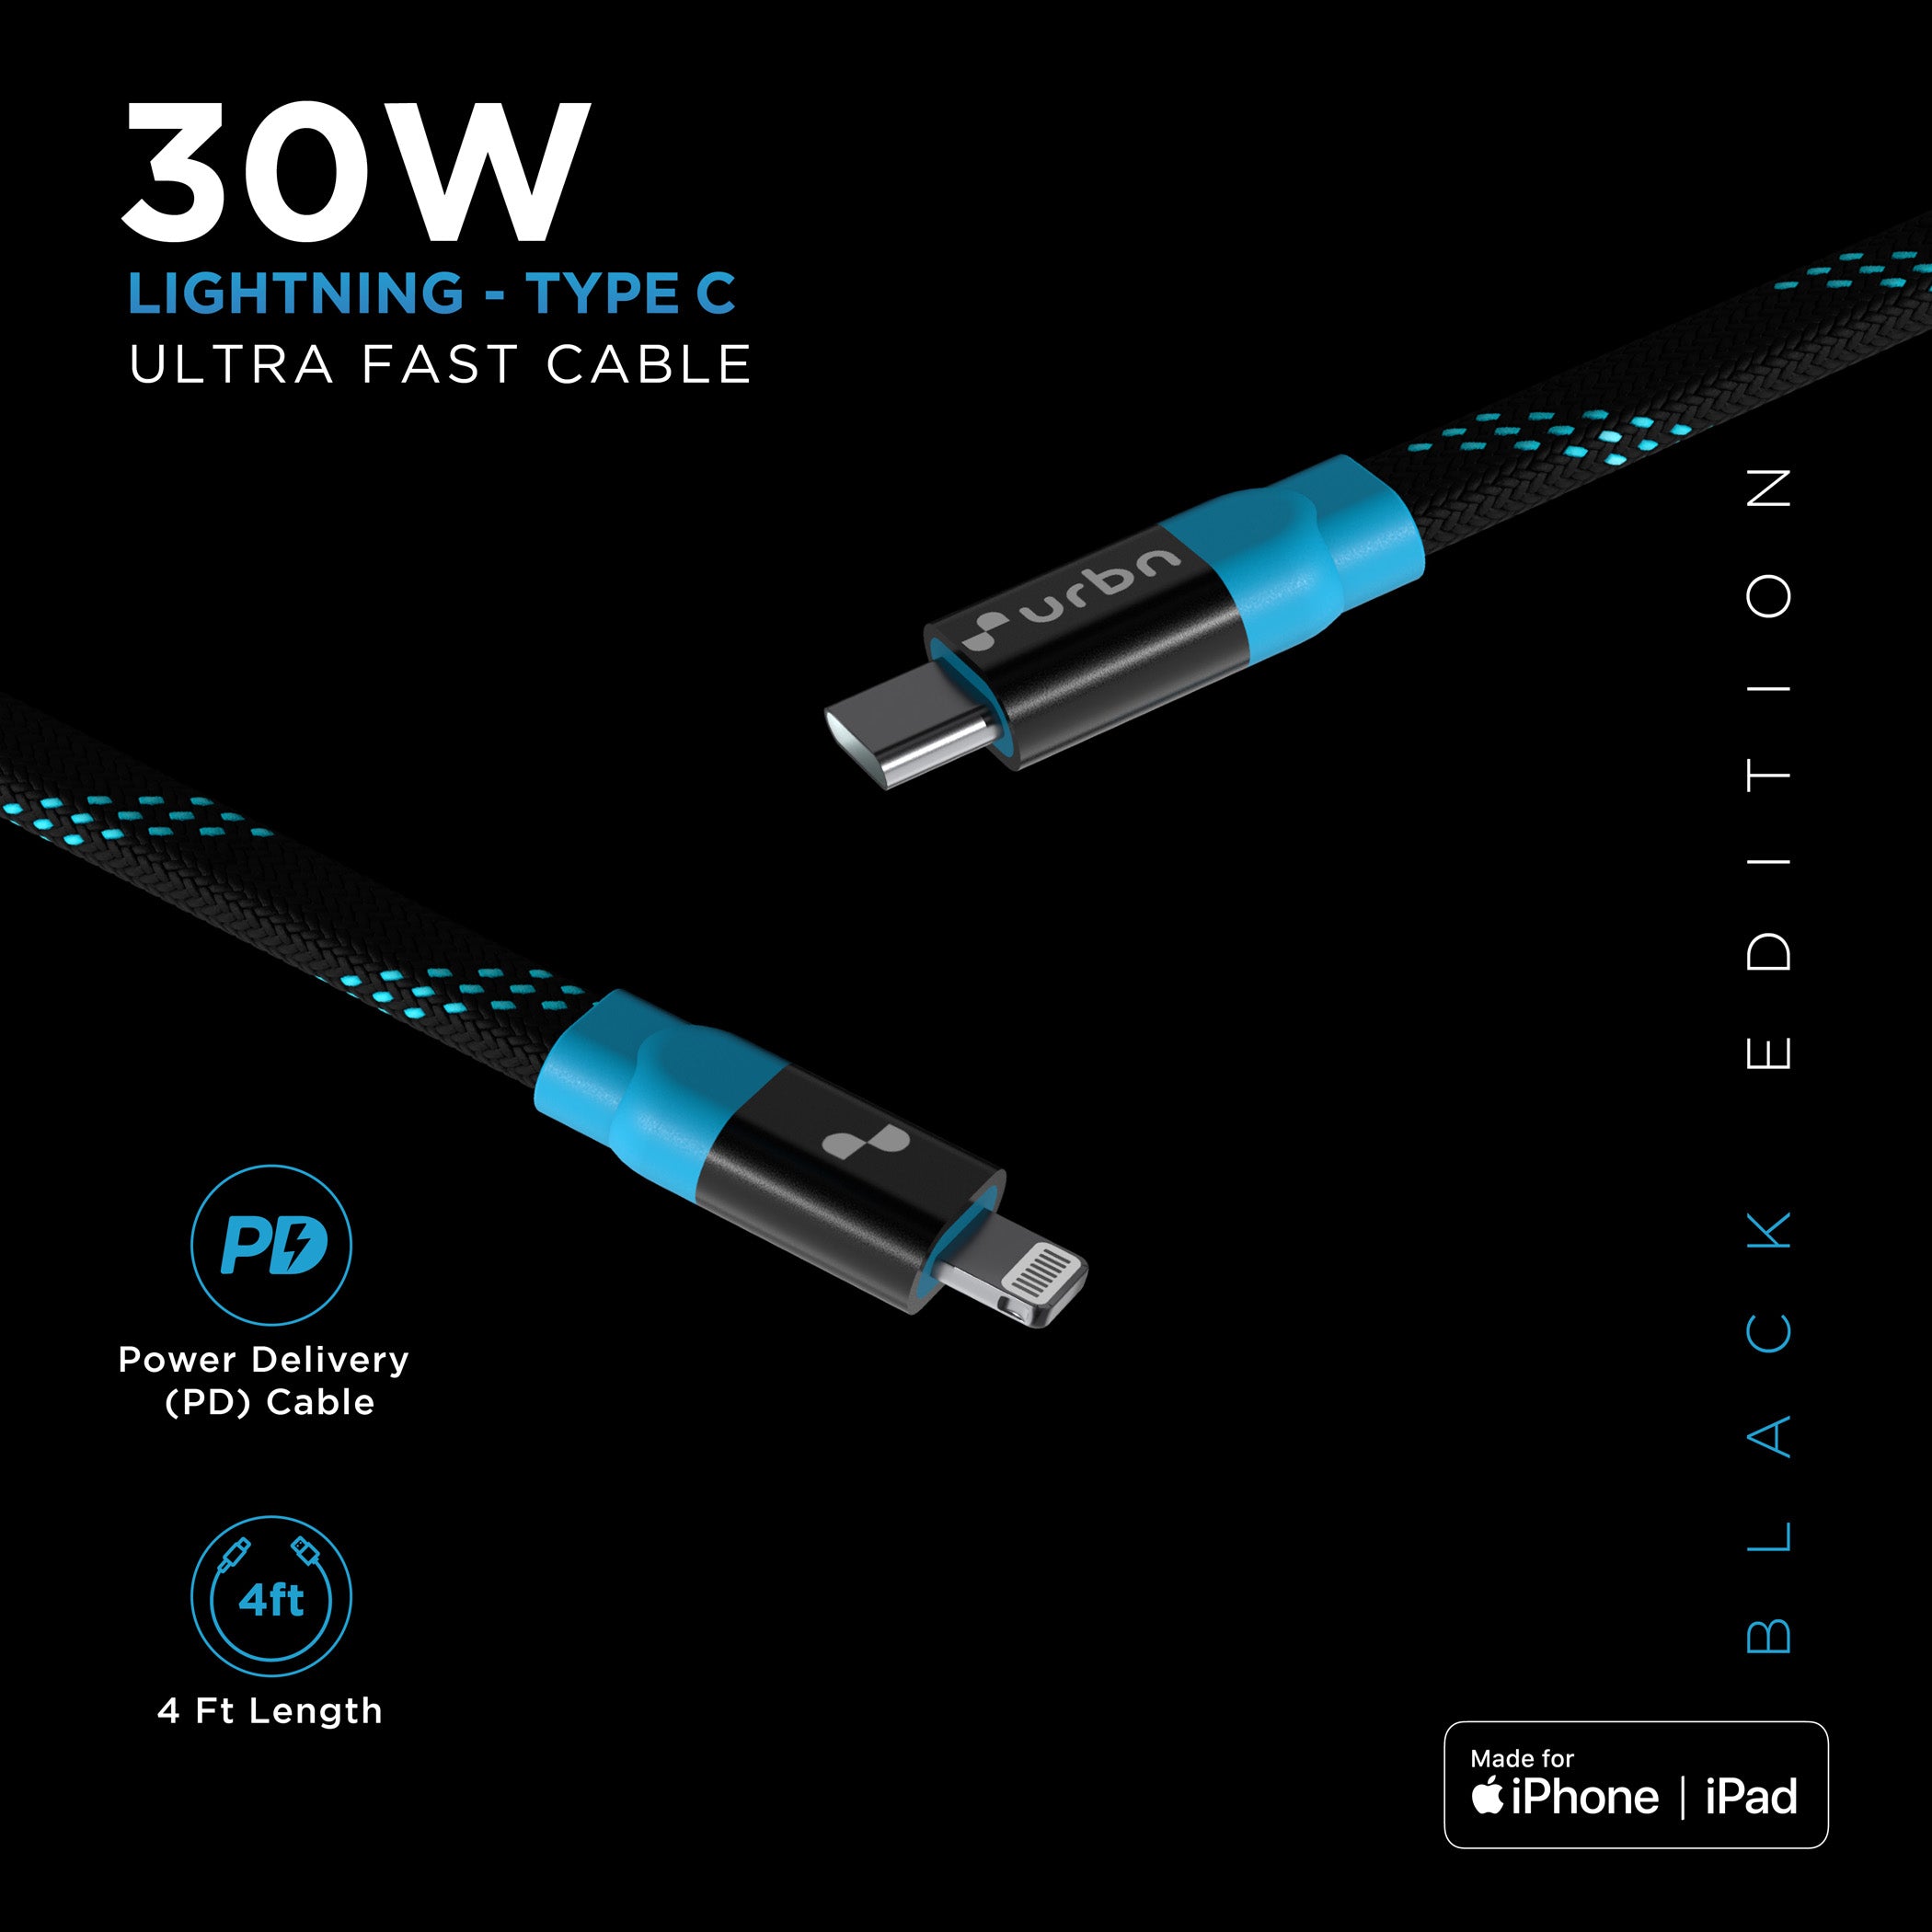 30W Super Fast Lightning MFi Certified Cable